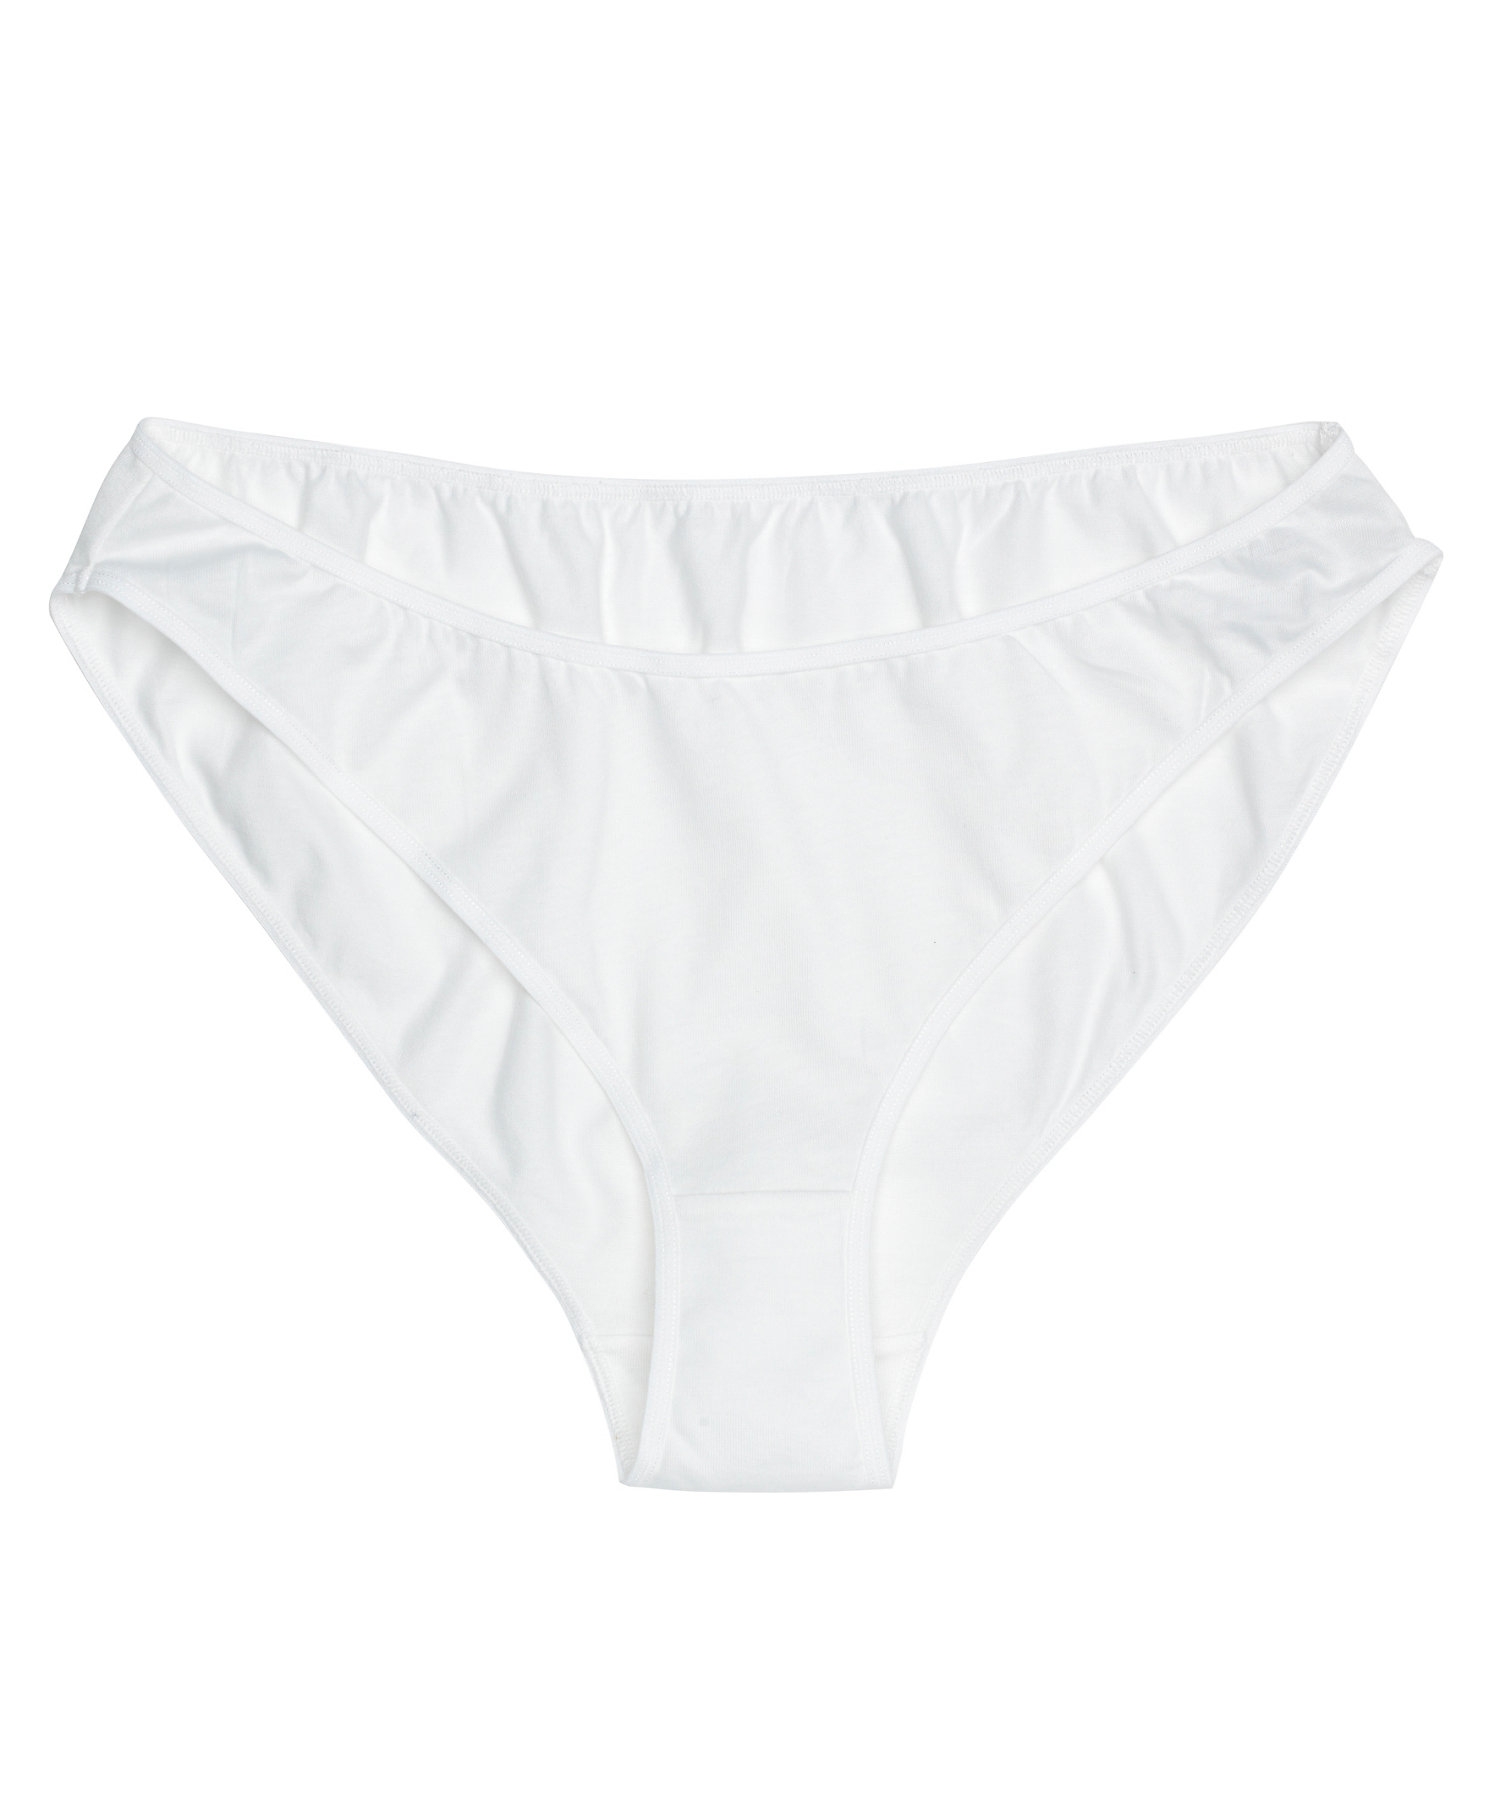 Mothercare | Women Maternity Briefs - Pack Of 5 - Multicolor 2